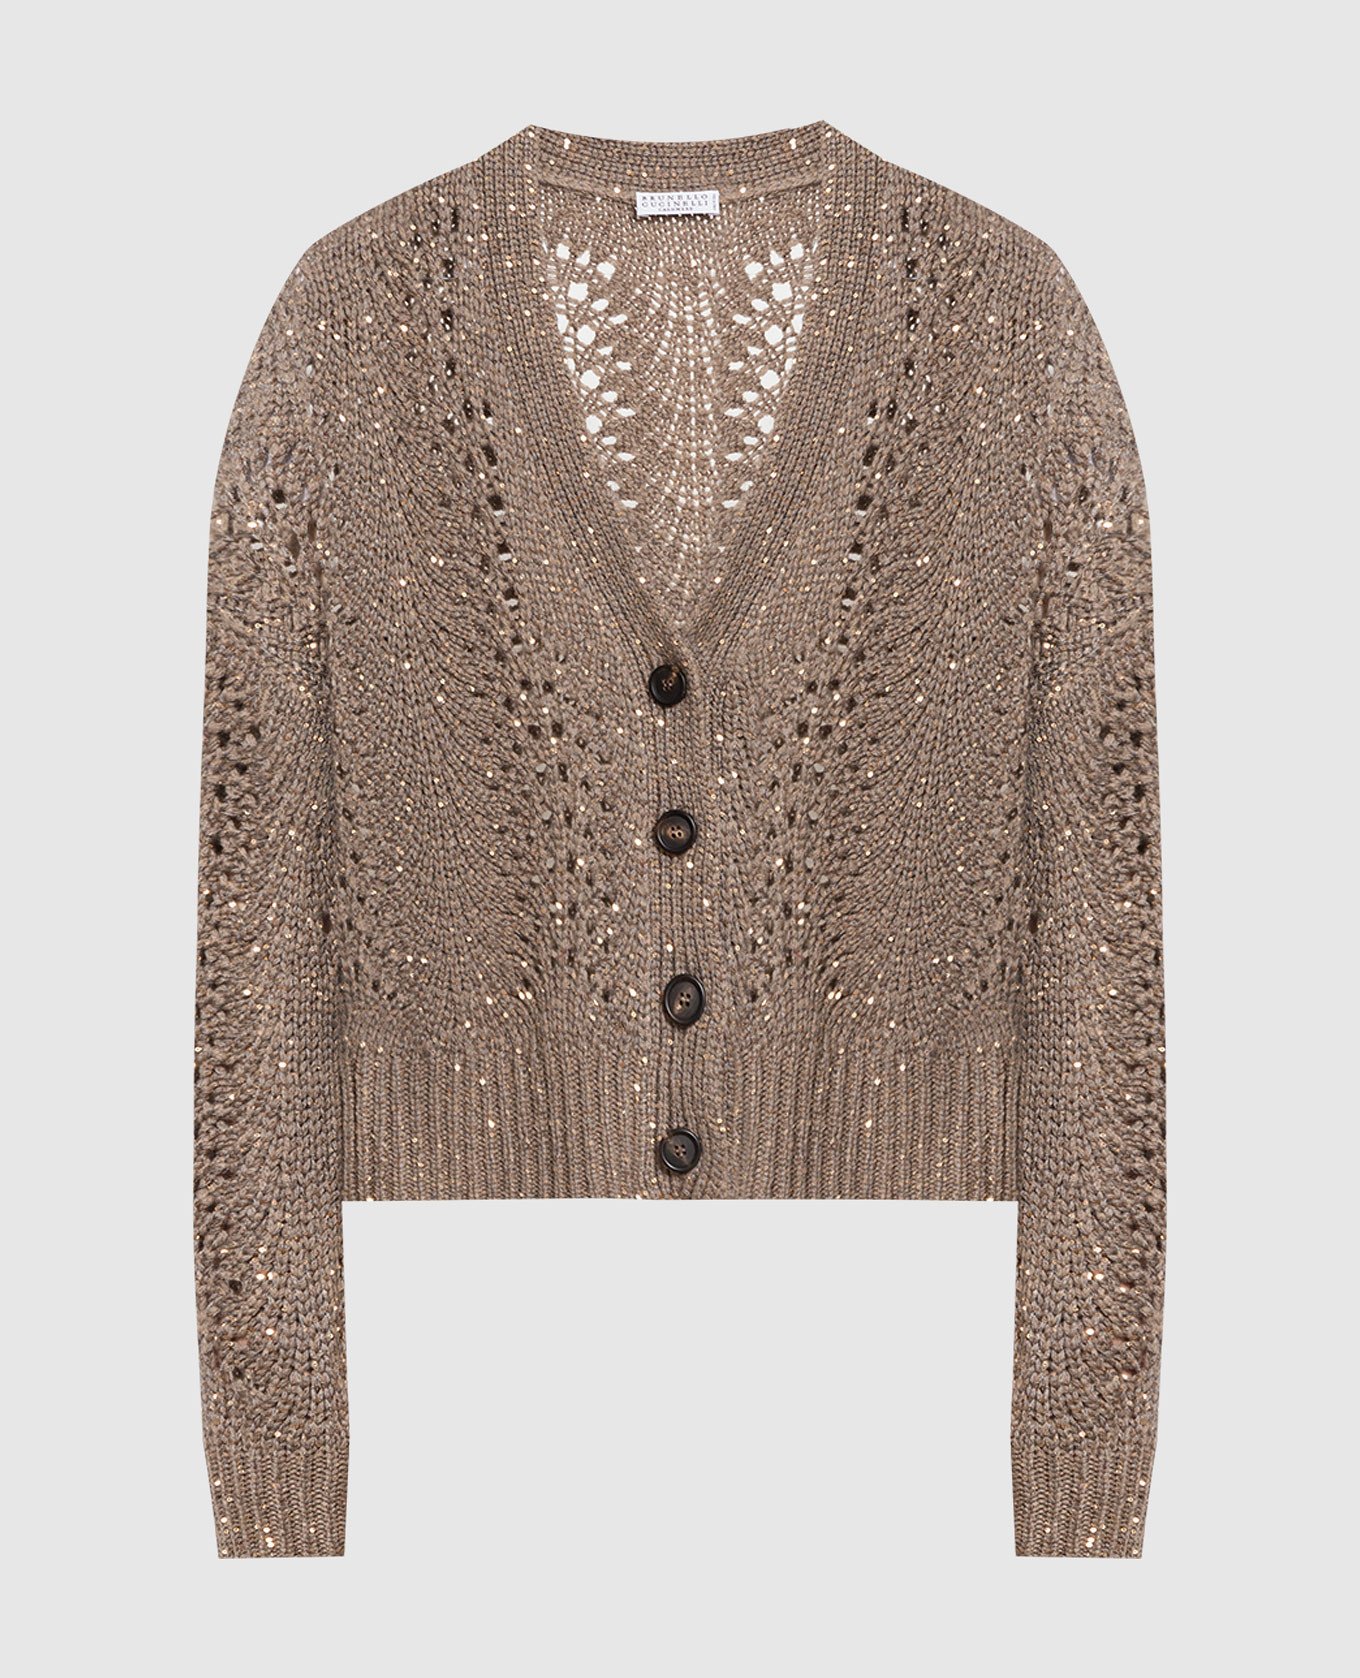 Brown cardigan in an openwork pattern with sequins